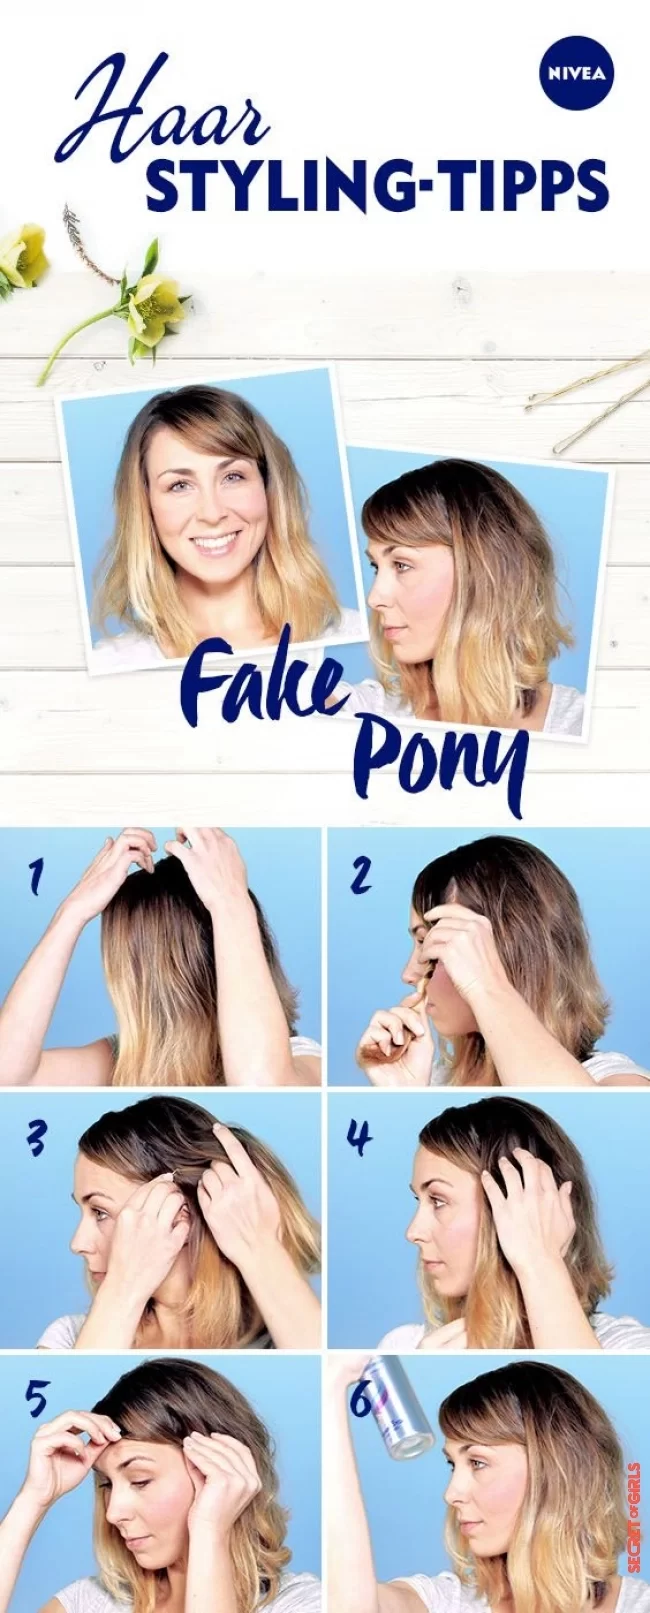 Fake ponies | 3 hairstyles that will change your hair without a haircut